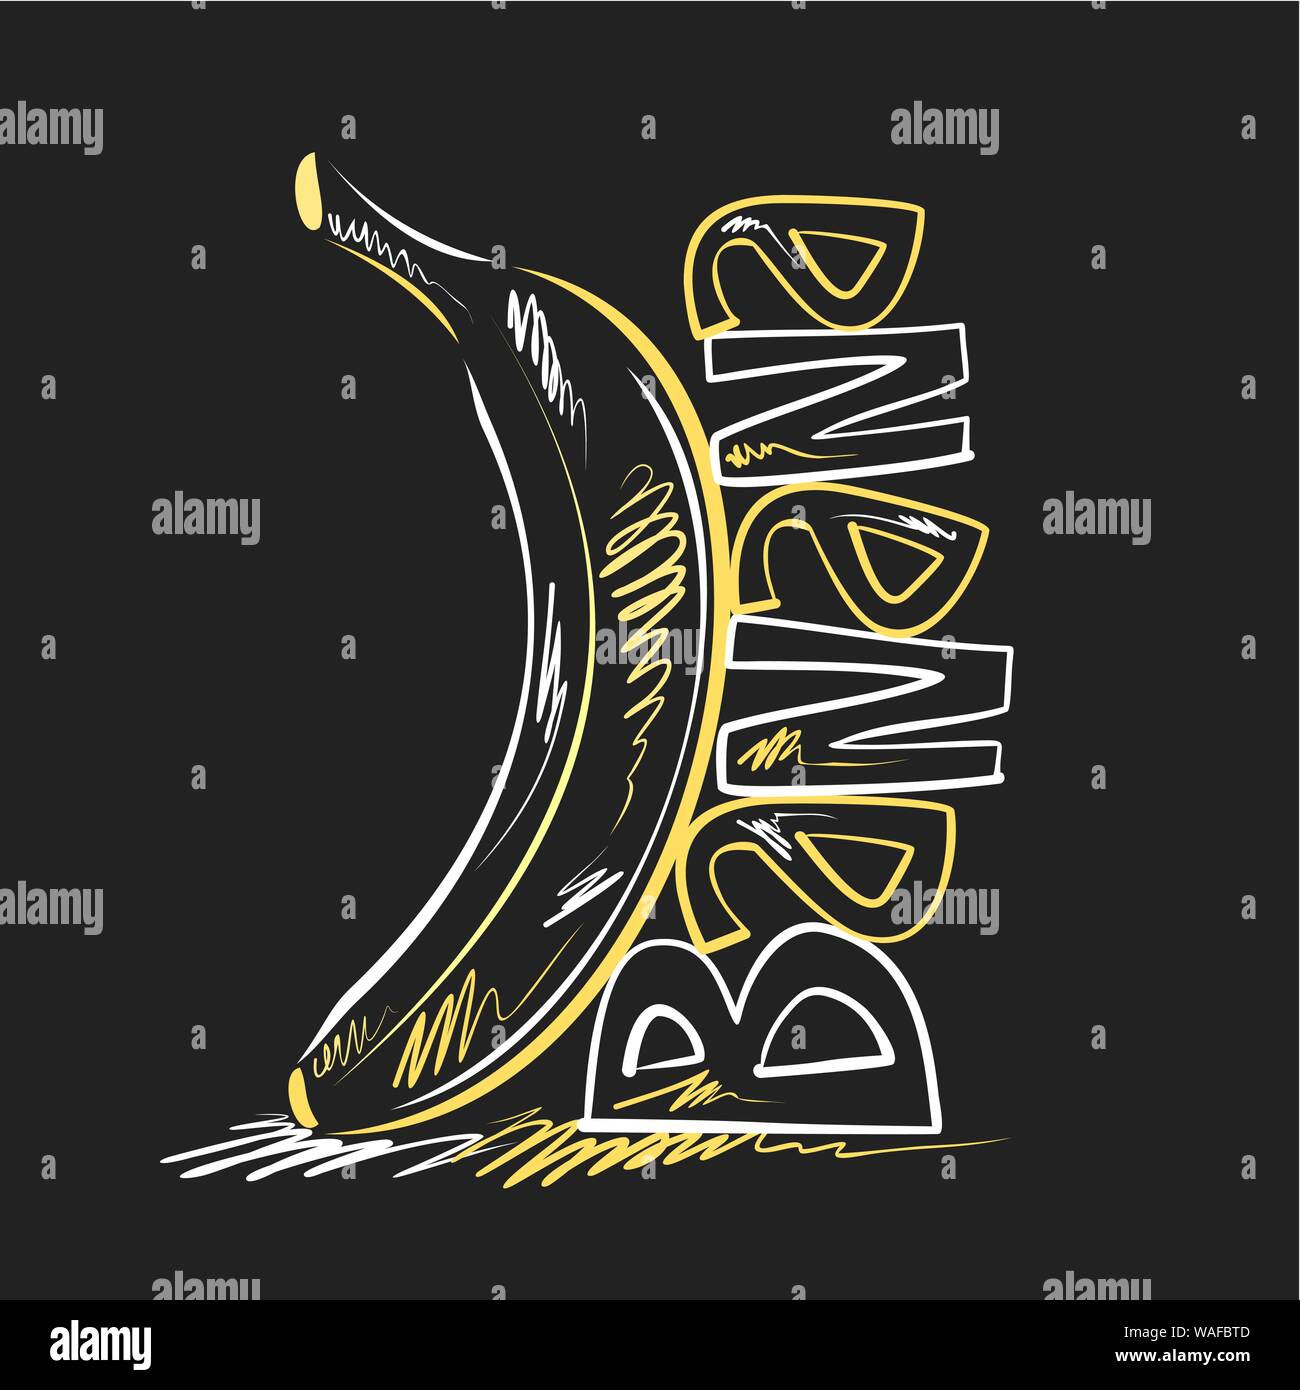 Vector logo for Banana, decorative label with creative standing yellow plantain on black background, poster with modern chalk sketch with original let Stock Vector